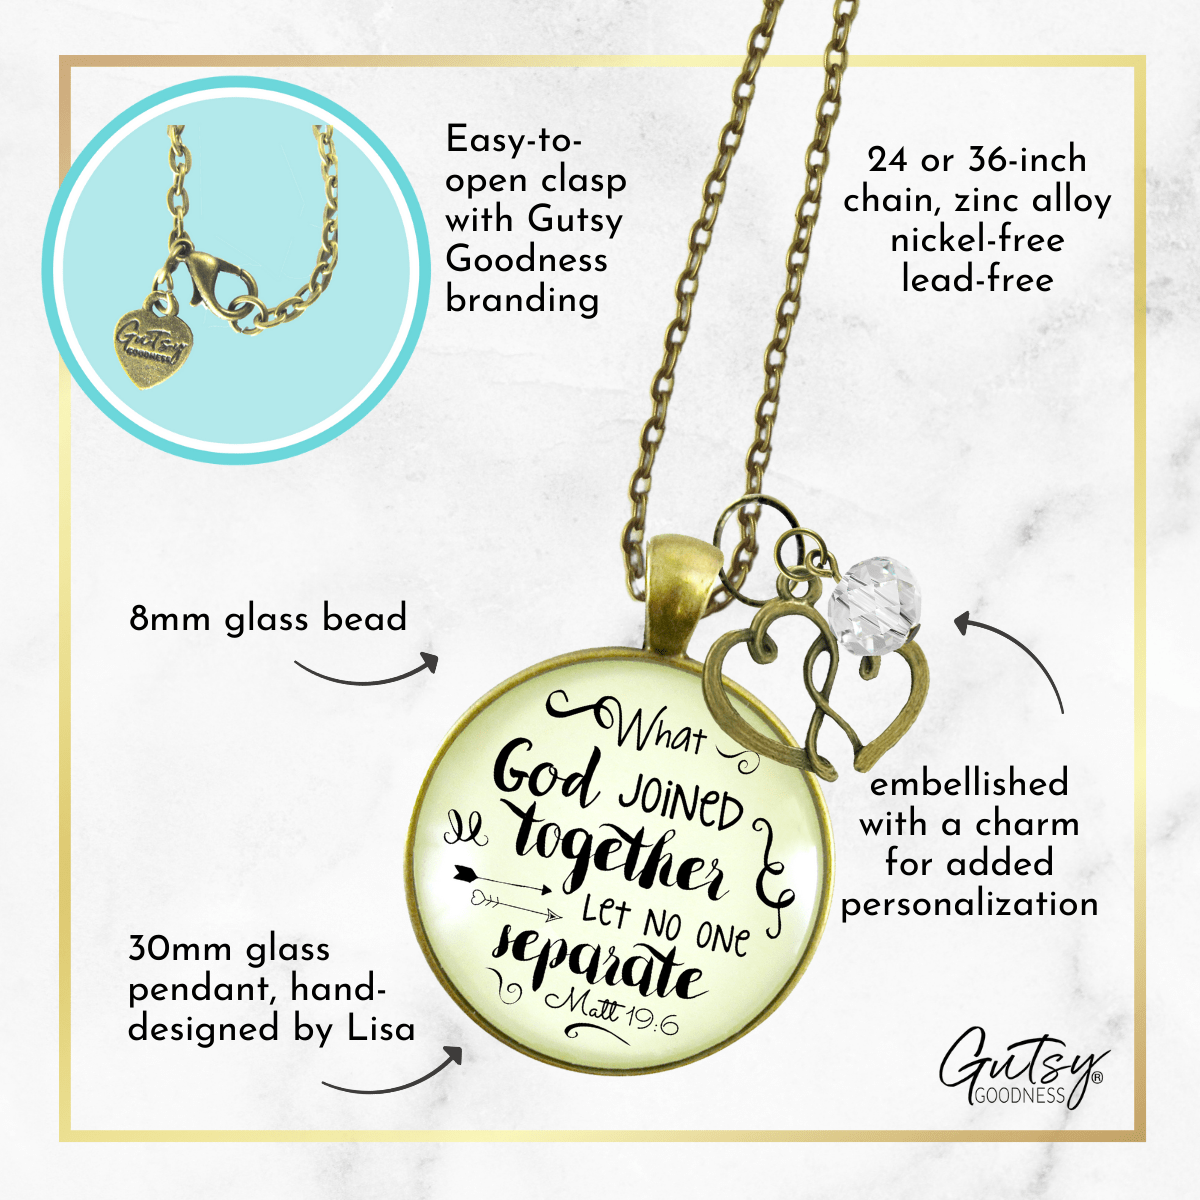 Gutsy Goodness Love My Wife Necklace What God Joined Womens Faith Gift Jewelry - Gutsy Goodness Handmade Jewelry;What God Has Joined Together / From Husband - Gutsy Goodness Handmade Jewelry Gifts